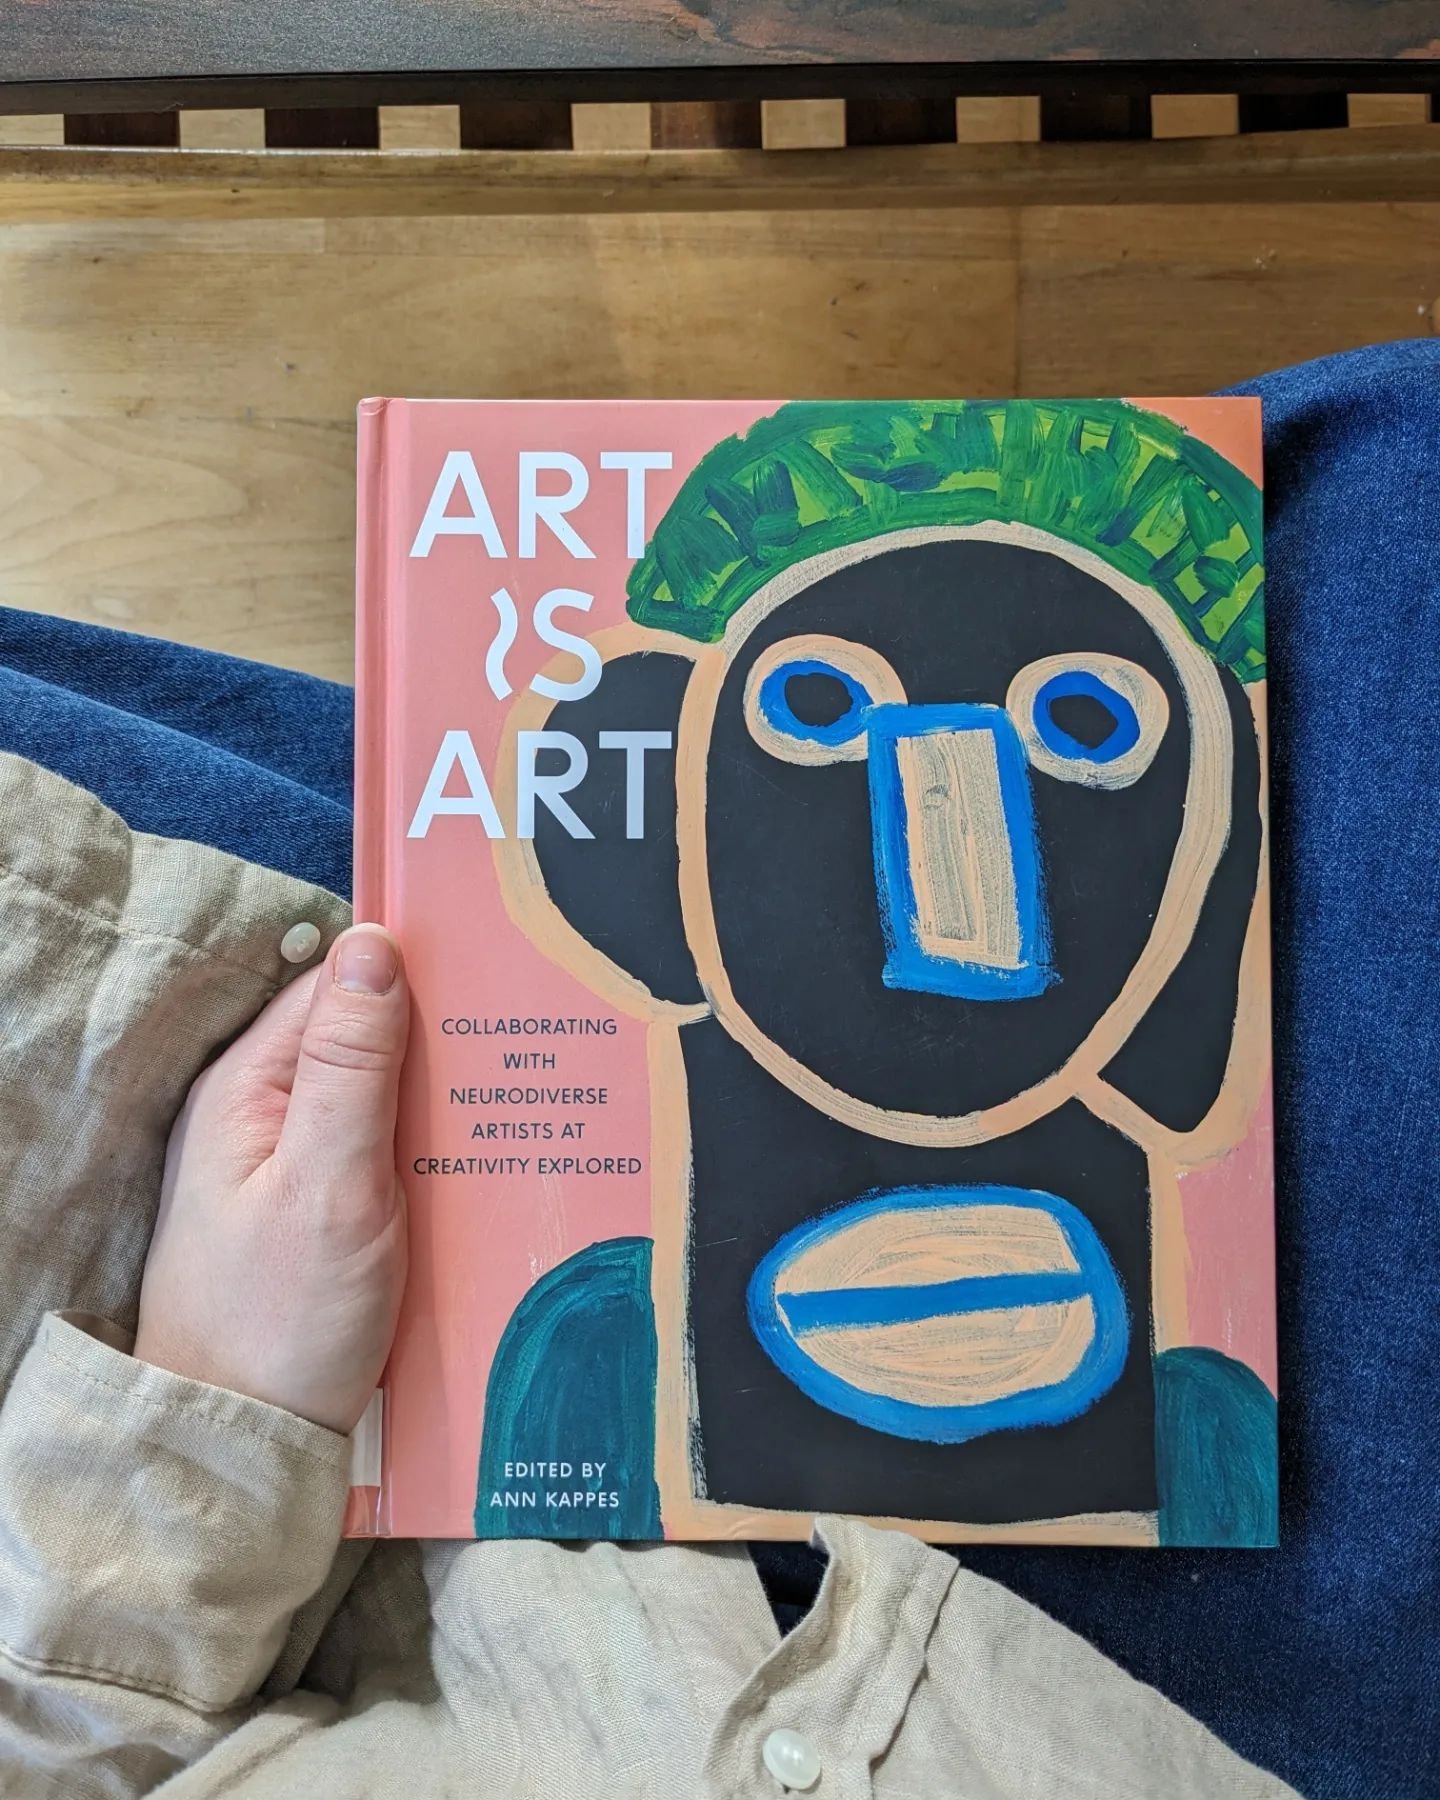 I love a good art book, and picked this one up from the library recently. It's a collection of artwork, artists and exhibitions put on by @creativityexplored over the last 40 years. There's some really interesting work in here, and I loved learning m